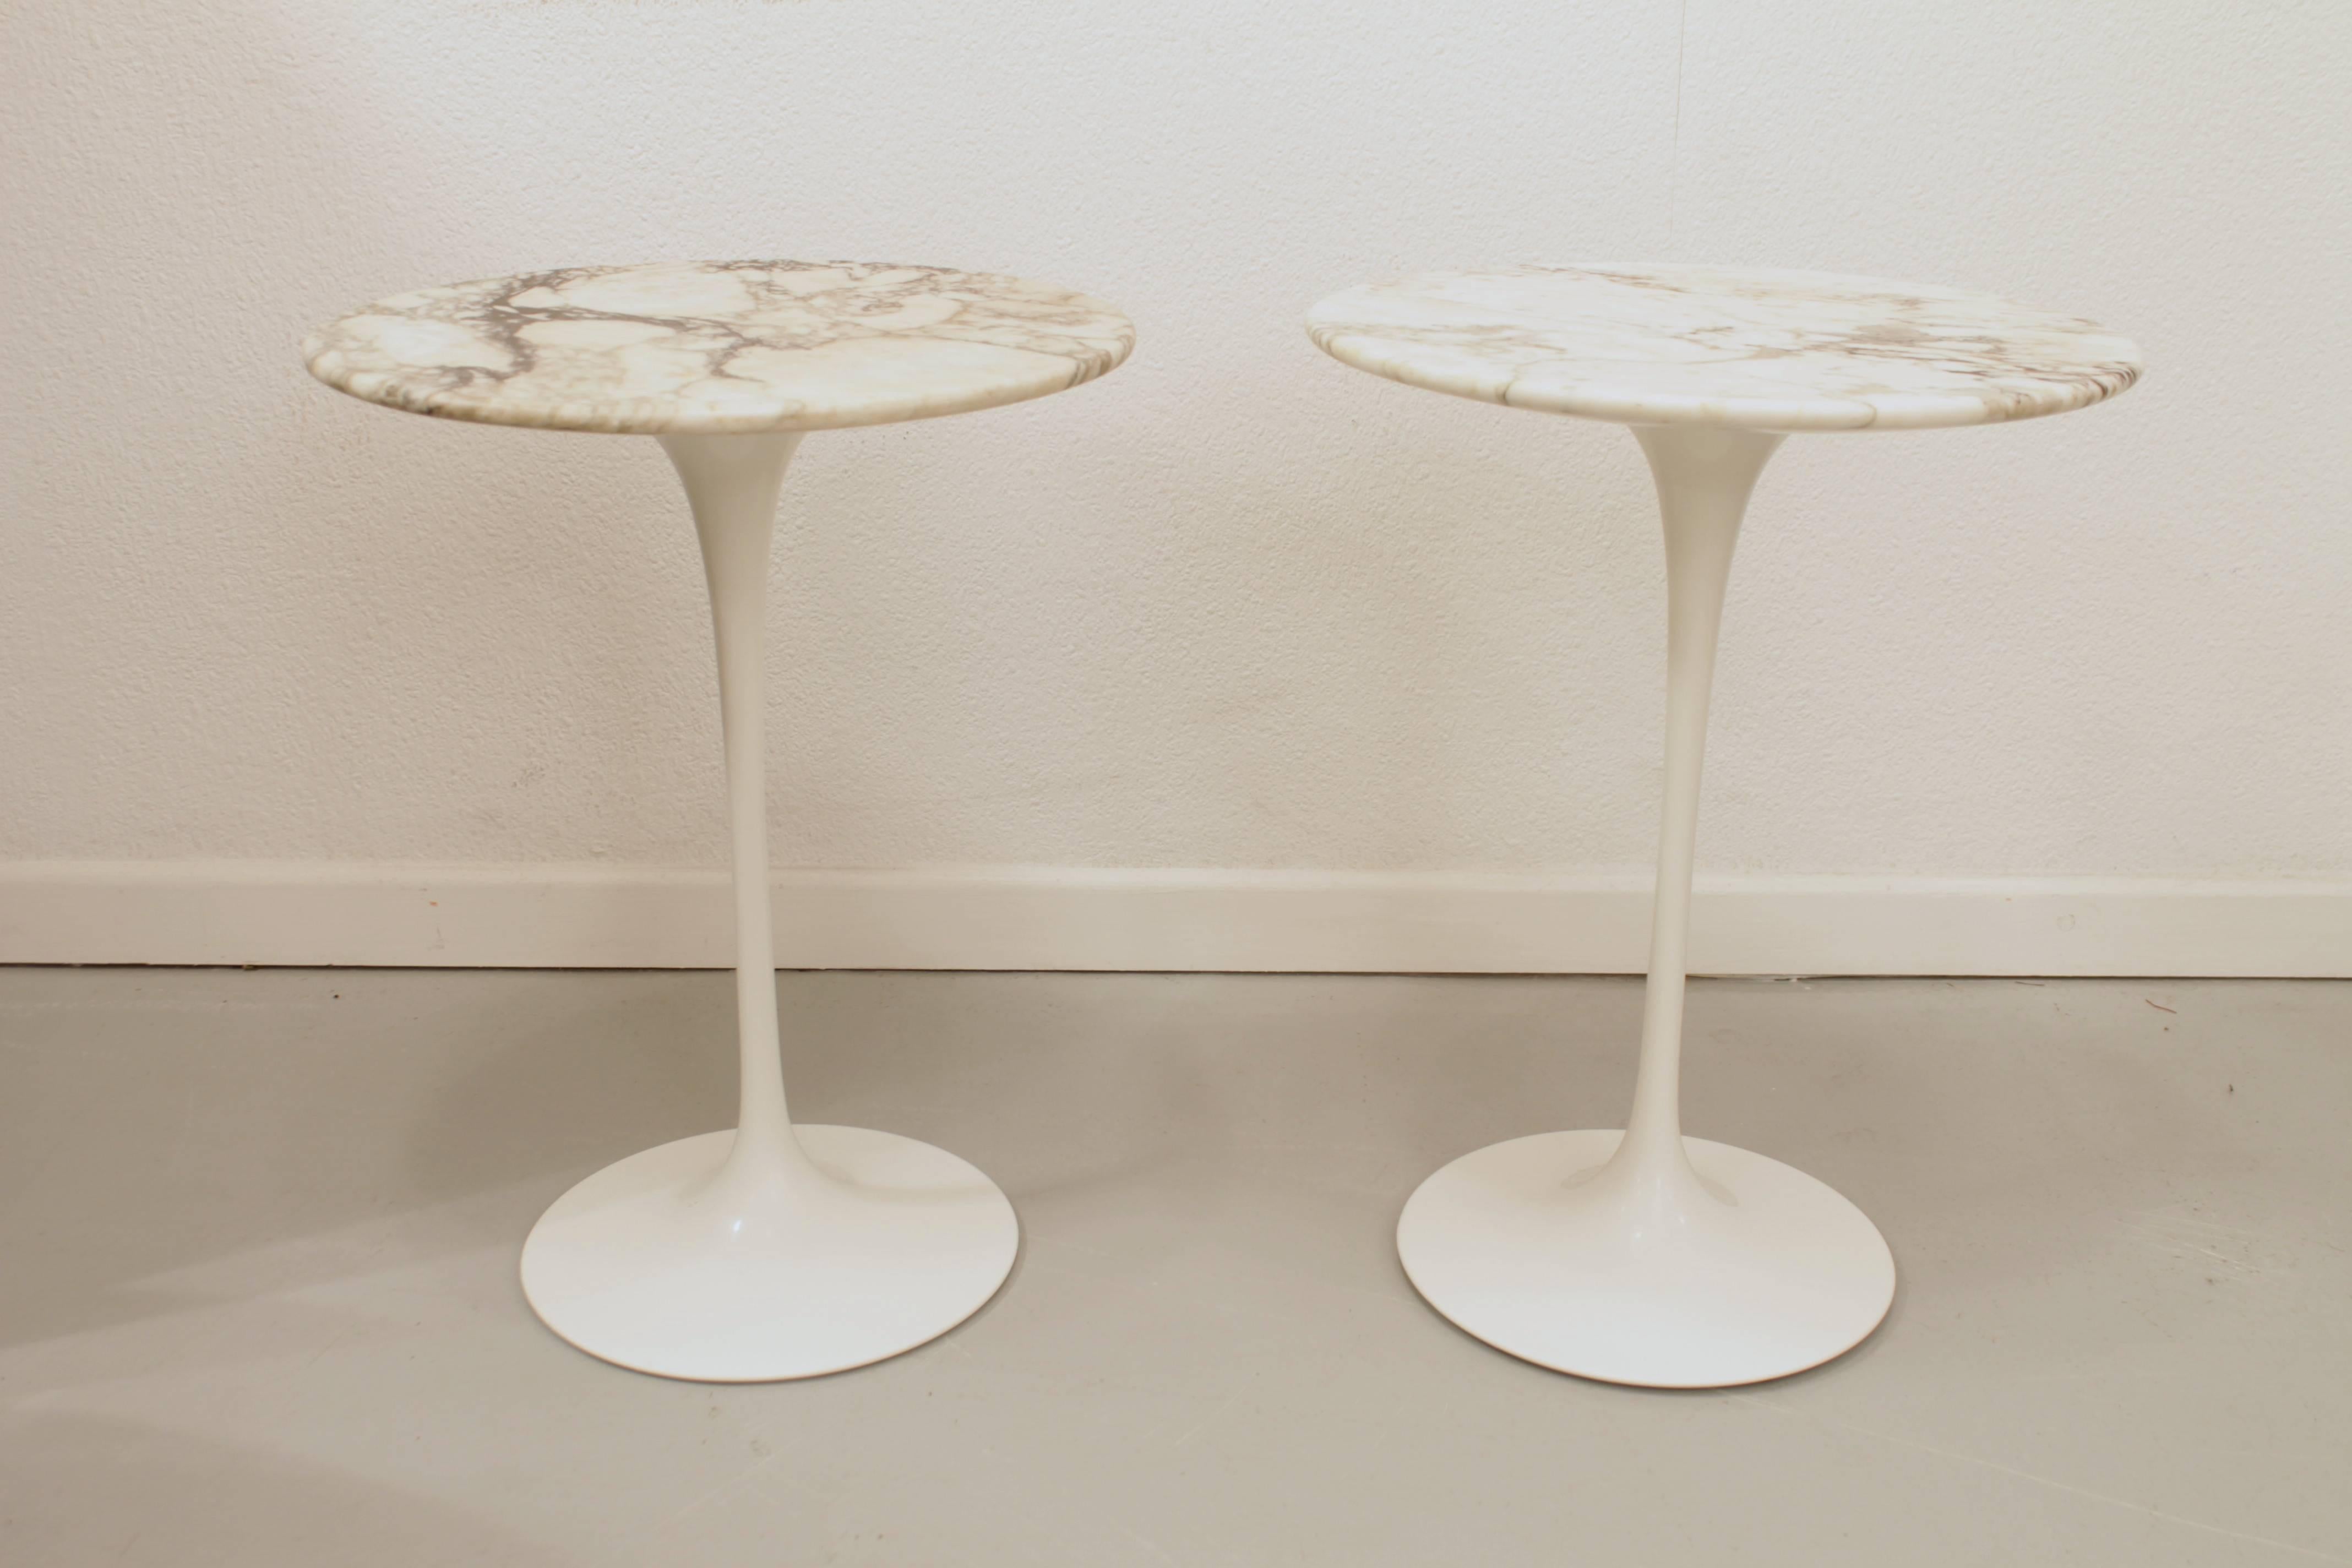 Pair of marble side tables by Eero Saarinen for Knoll 
Measure: 41 cm diameter, 52 cm high
Very good condition.